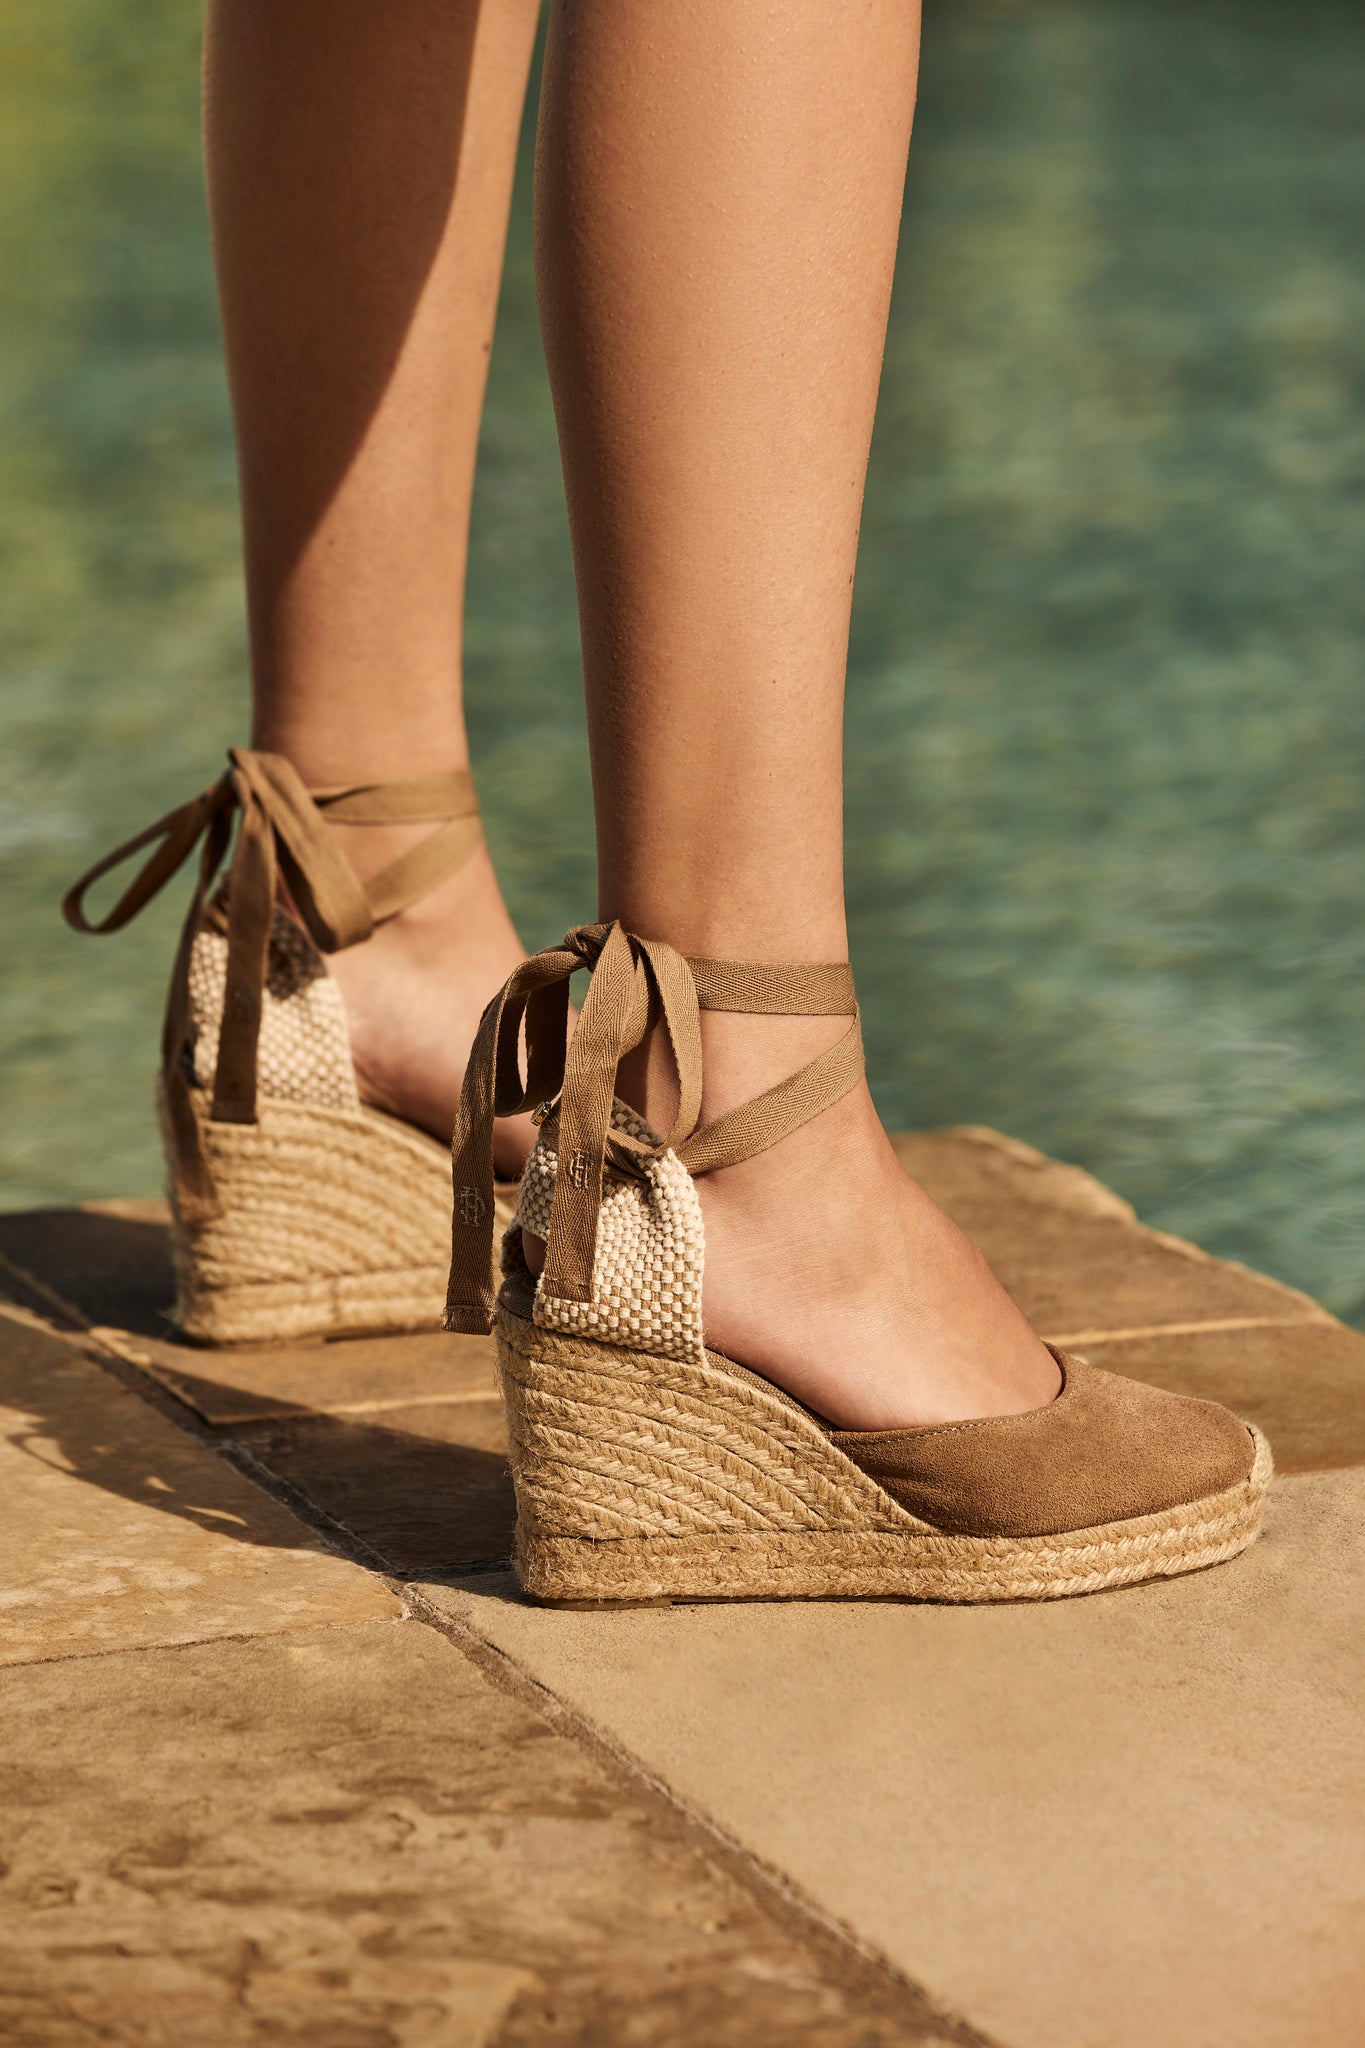 4 inch braided jute wedge heel with taupe suede top and tie up taupe ribbons around the ankle worn standing by the edge of a pool